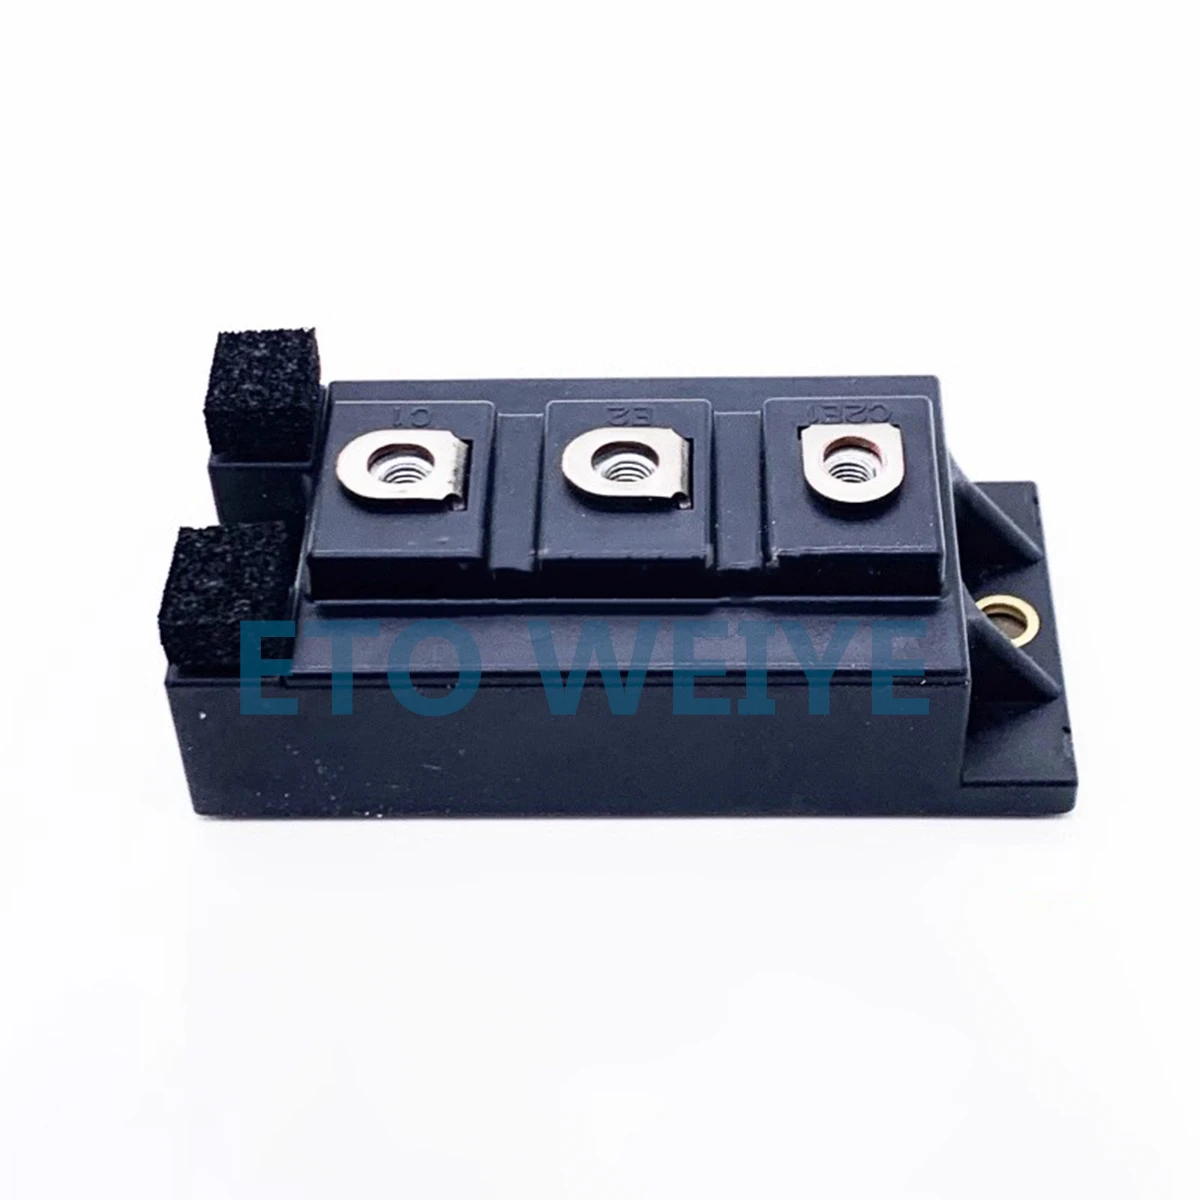 

2MBI100NC-120 IGBT MODLUE SCR(silicon controlled rectifier) For more information, please contact